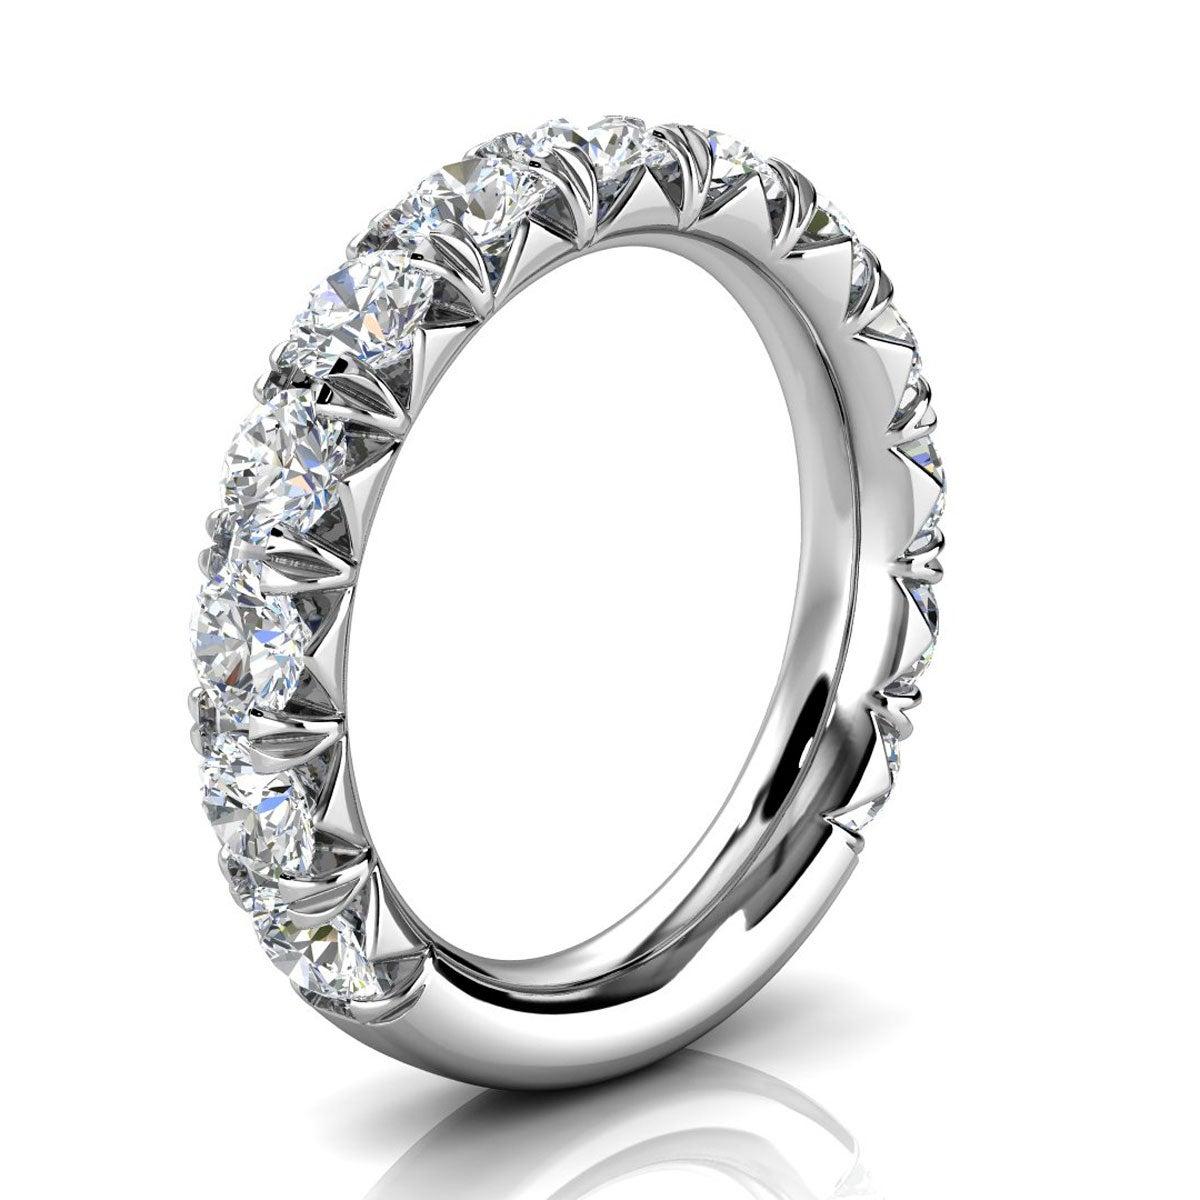 For Sale:  14k White Gold GIA French Pave Diamond Ring '2 Ct. Tw' 2